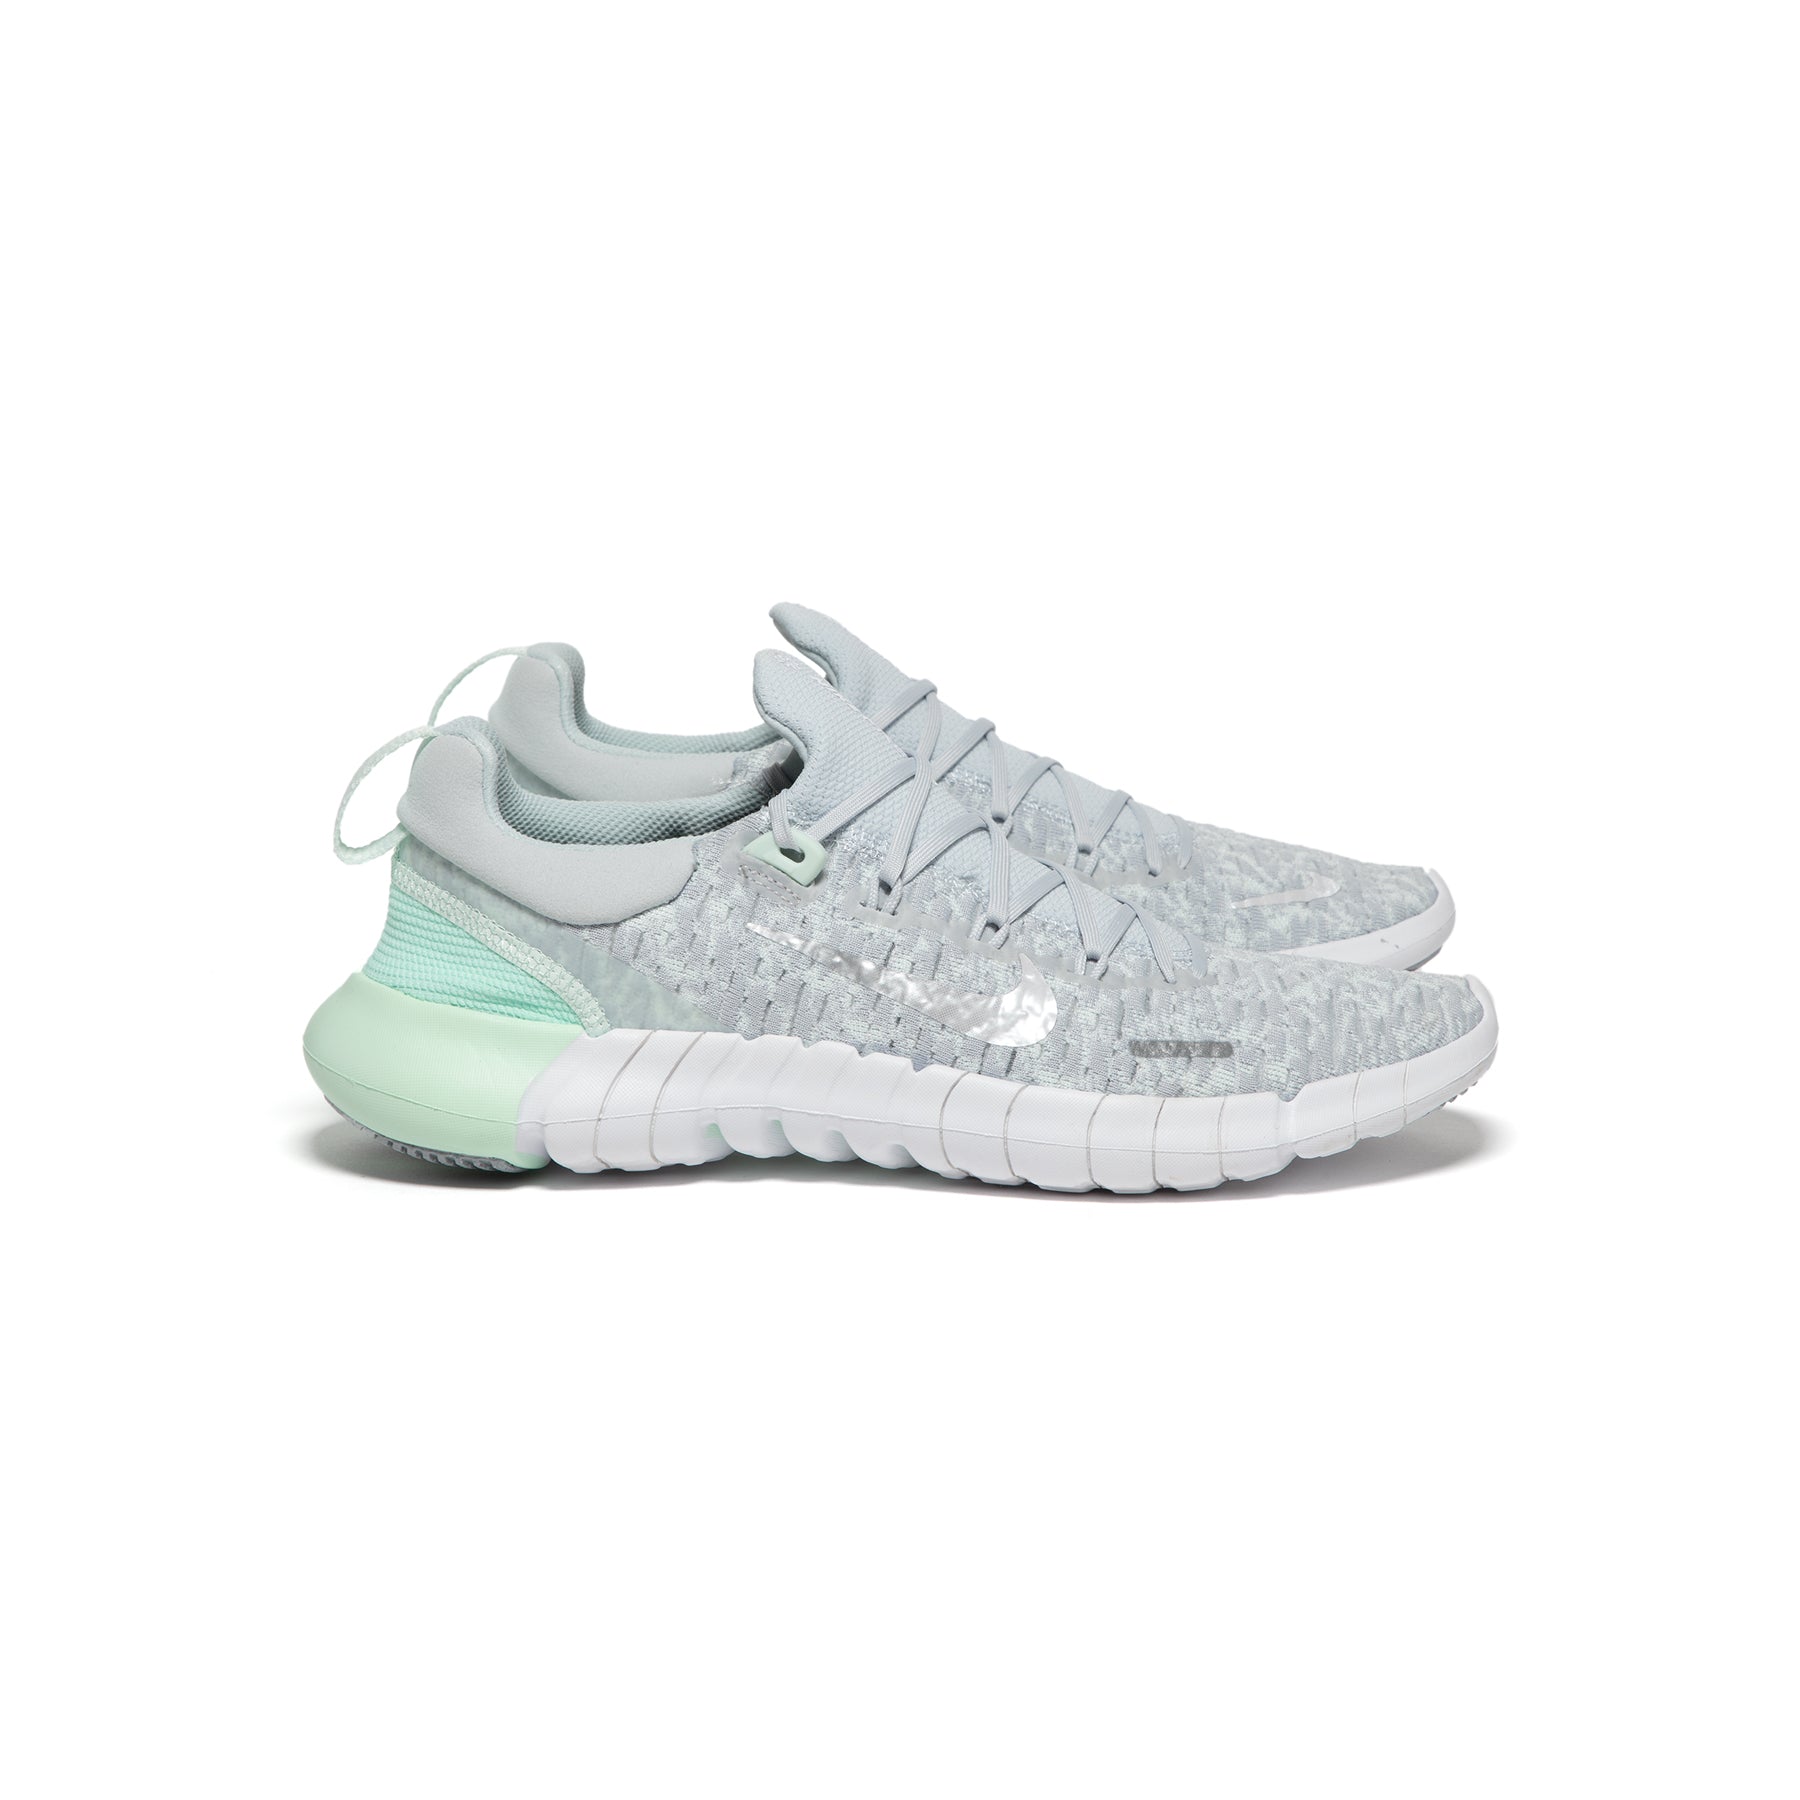 Nike 5.0 (Pure Platinum/White/Barely Green) | Concepts